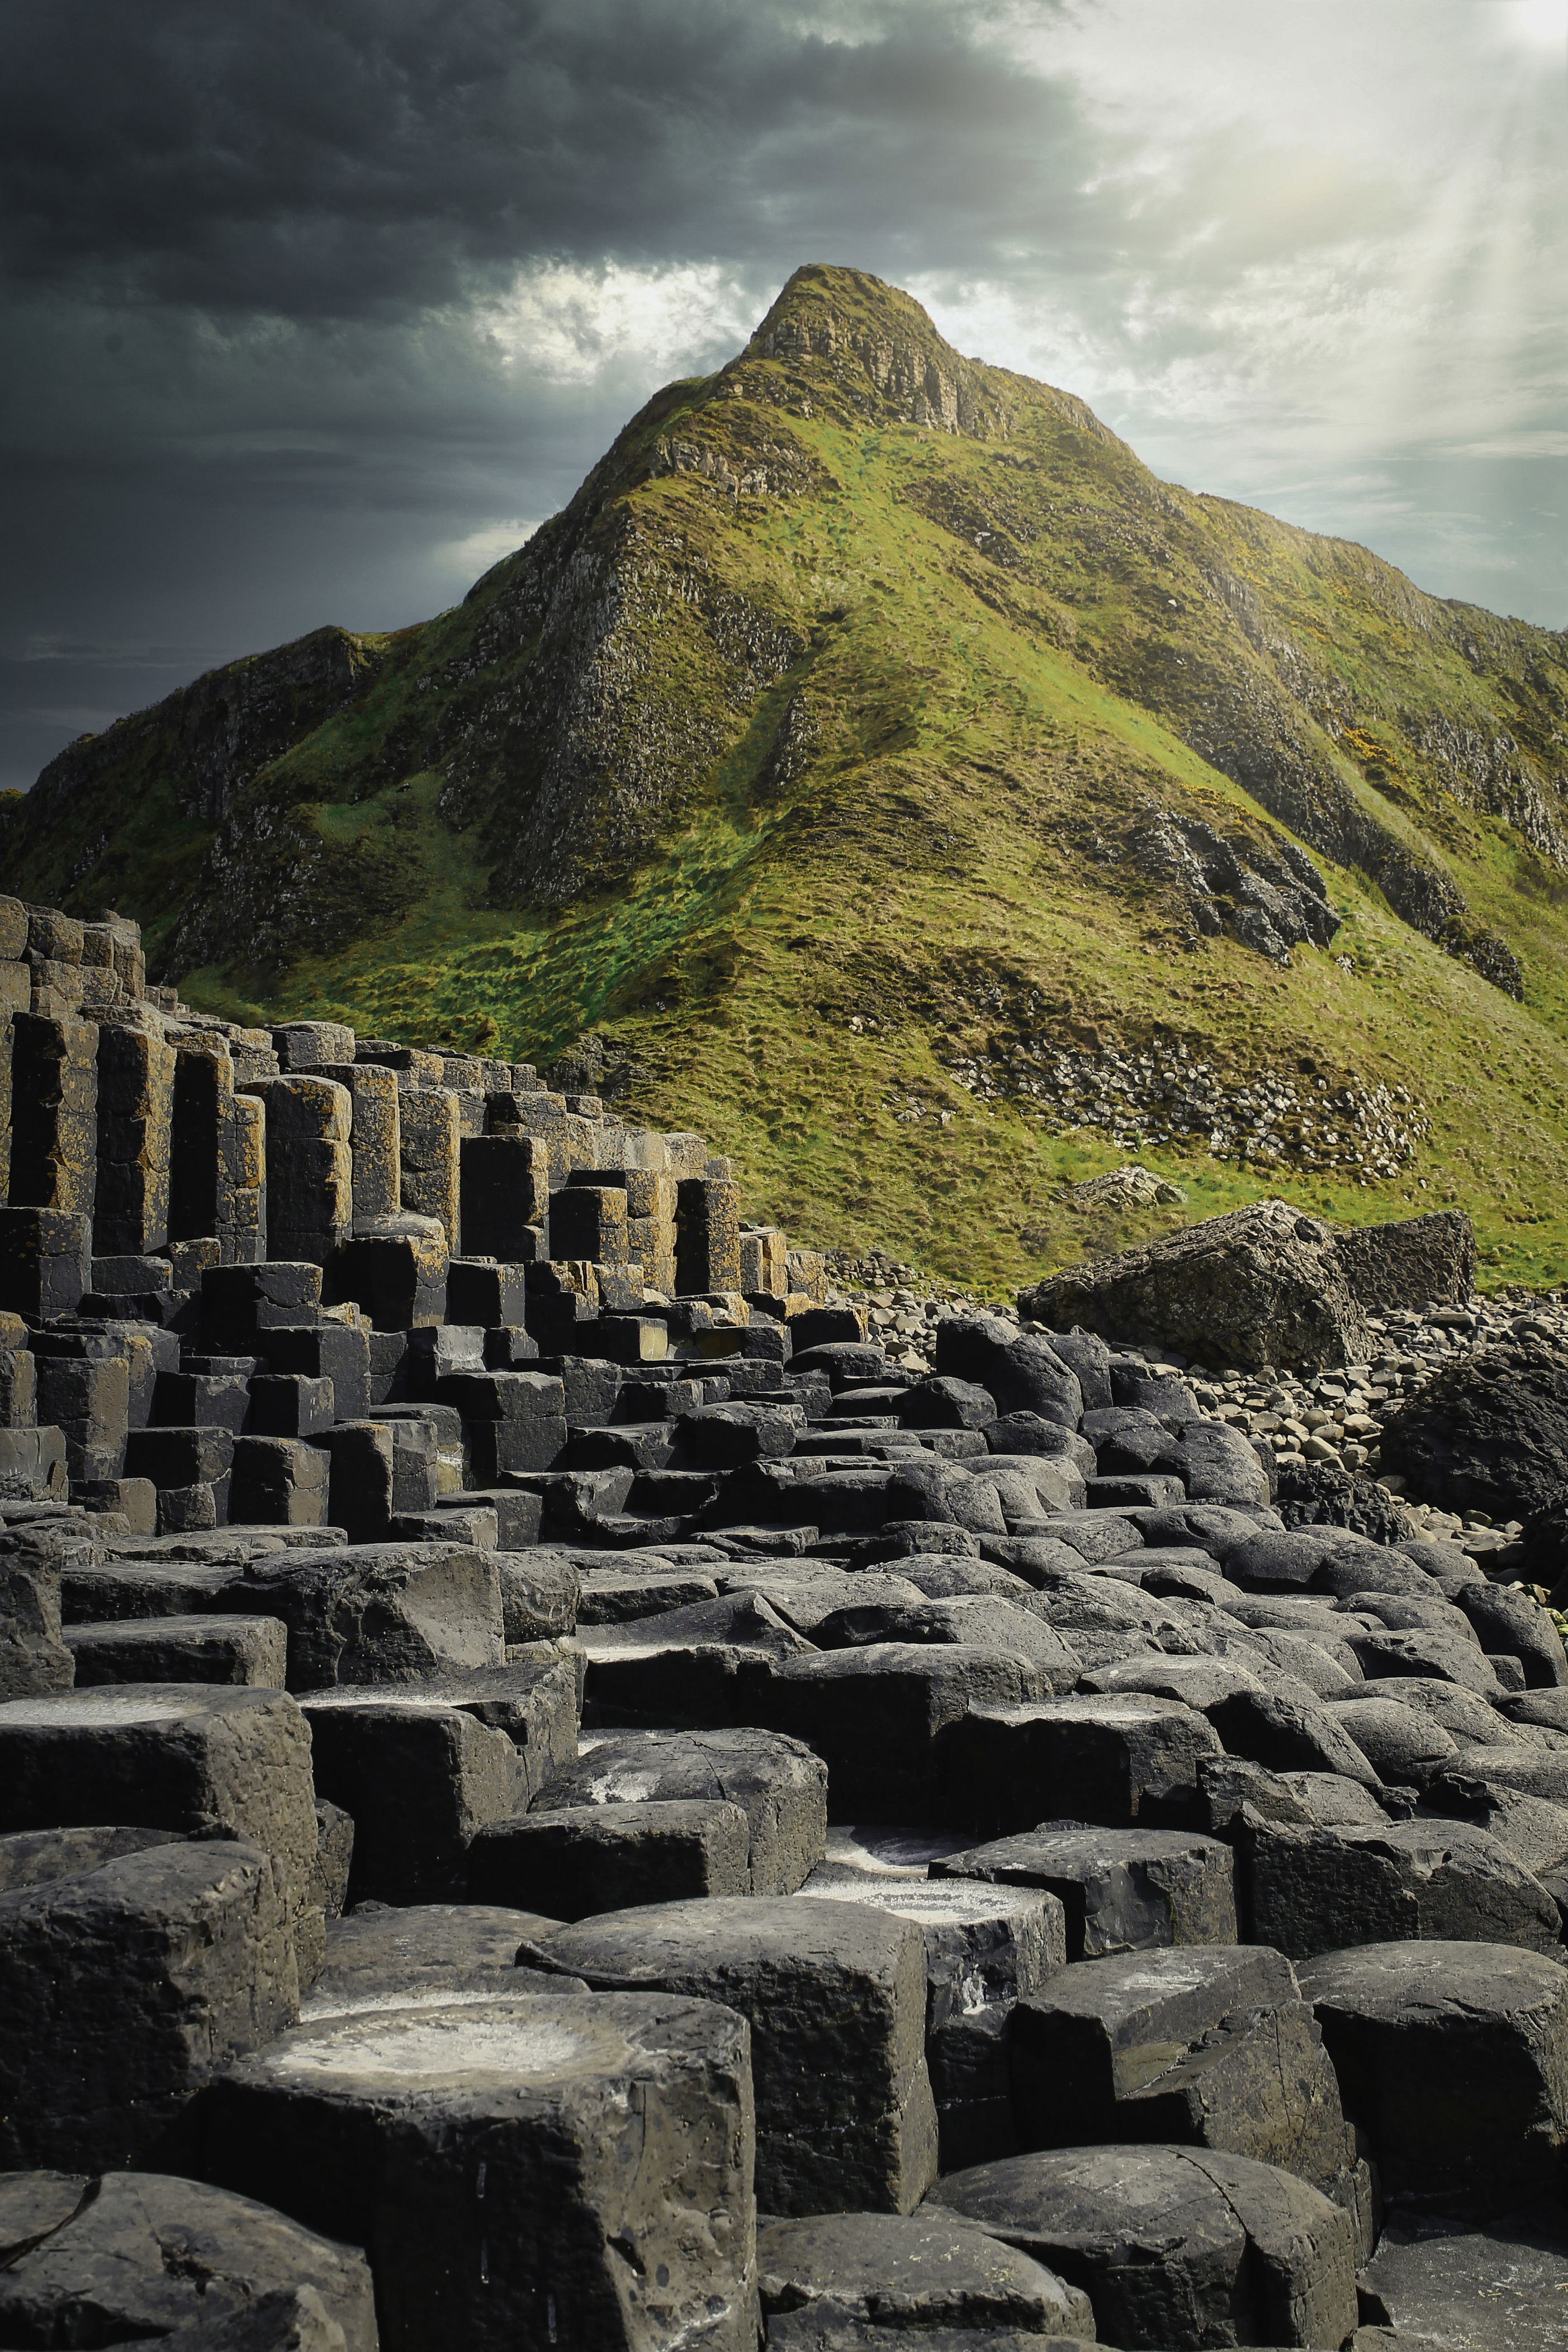 <p><strong>Location:</strong> County Antrim</p> <p>Giant’s Causeway is a natural wonder worthy of its whimsical moniker. The <a href="https://www.cntraveler.com/galleries/2014-12-23/most-beautiful-unesco-world-heritage-sites-galapagos-taj-mahal-yosemite?mbid=synd_msn_rss&utm_source=msn&utm_medium=syndication">UNESCO World Heritage Site</a> is made up of 40,000 hexagonal basalt columns, which were formed by volcanic activity 40–50 million years ago. Local lore tells the story a bit differently: Allegedly, a giant named Finn McCool tossed parts of the Antrim coast into the sea to beat a hasty path to fight a giant Scottish interloper. No matter how they got there, the rocks fit together as perfectly as puzzle pieces.</p><p>Sign up to receive the latest news, expert tips, and inspiration on all things travel</p><a href="https://www.cntraveler.com/newsletter/the-daily?sourceCode=msnsend">Inspire Me</a>